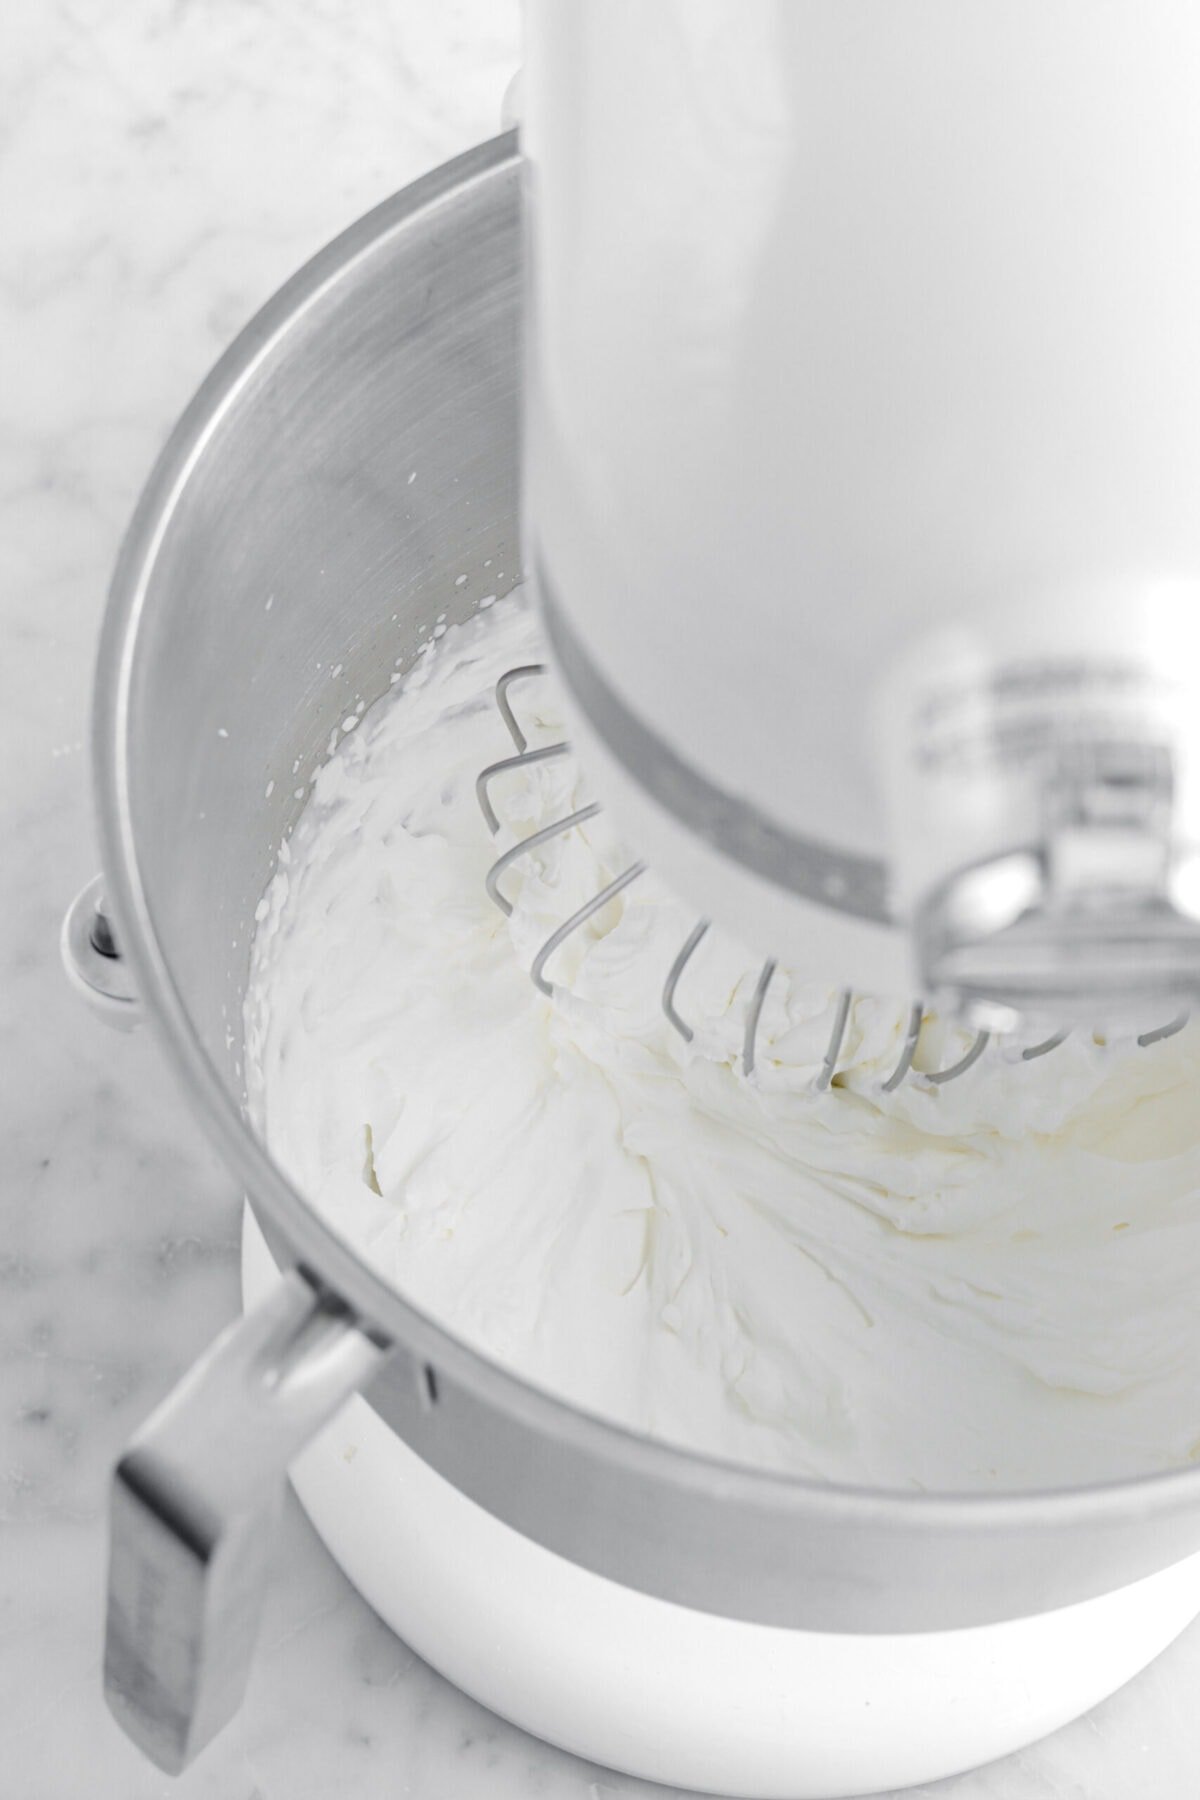 whipped cream in stand mixer.